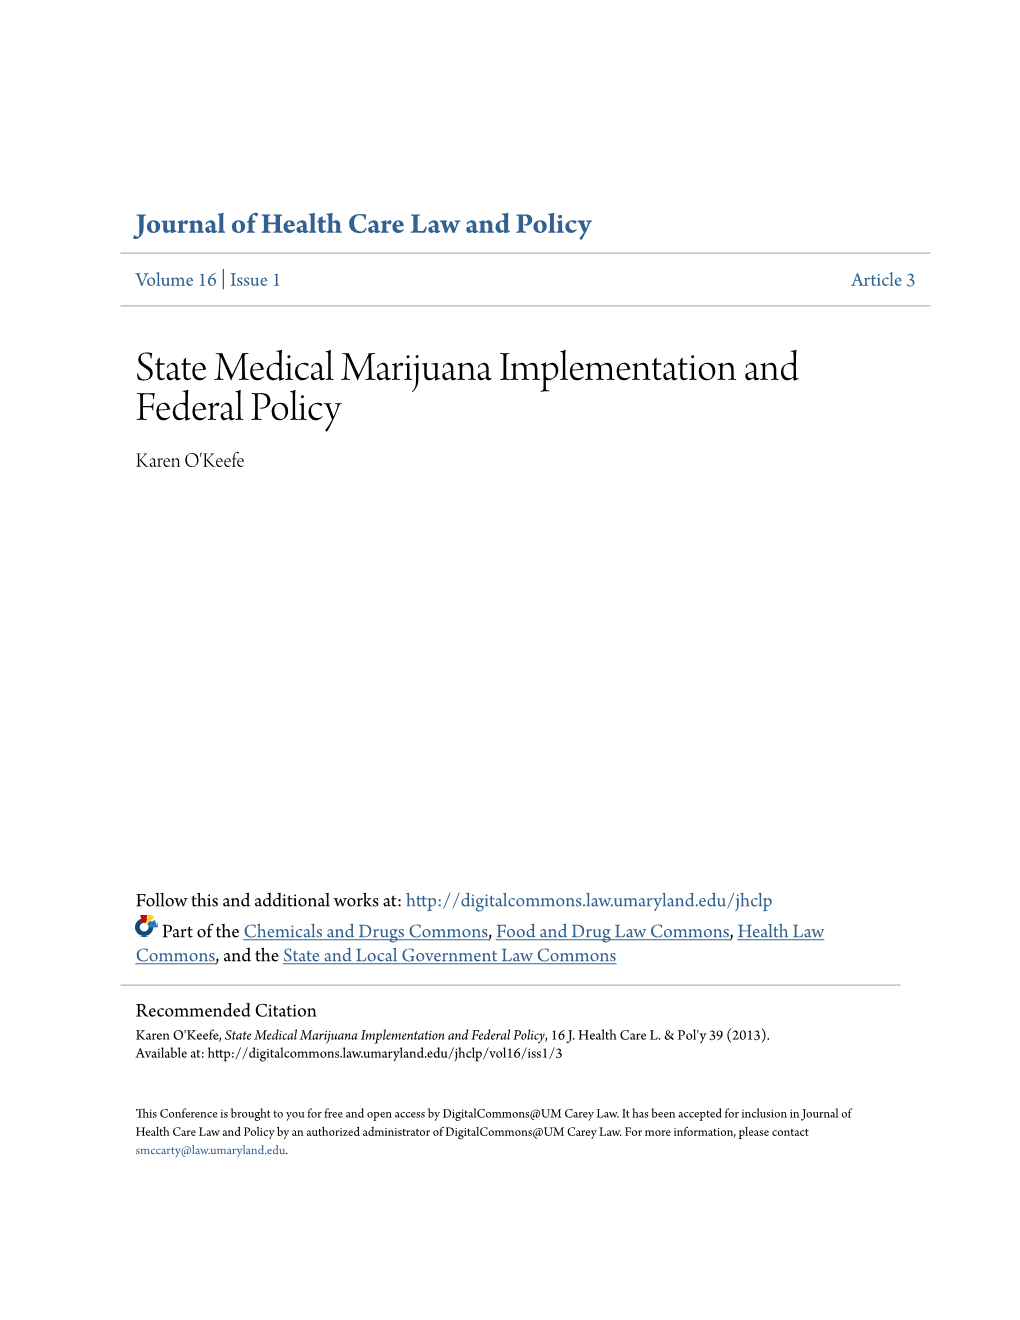 State Medical Marijuana Implementation and Federal Policy Karen O'keefe